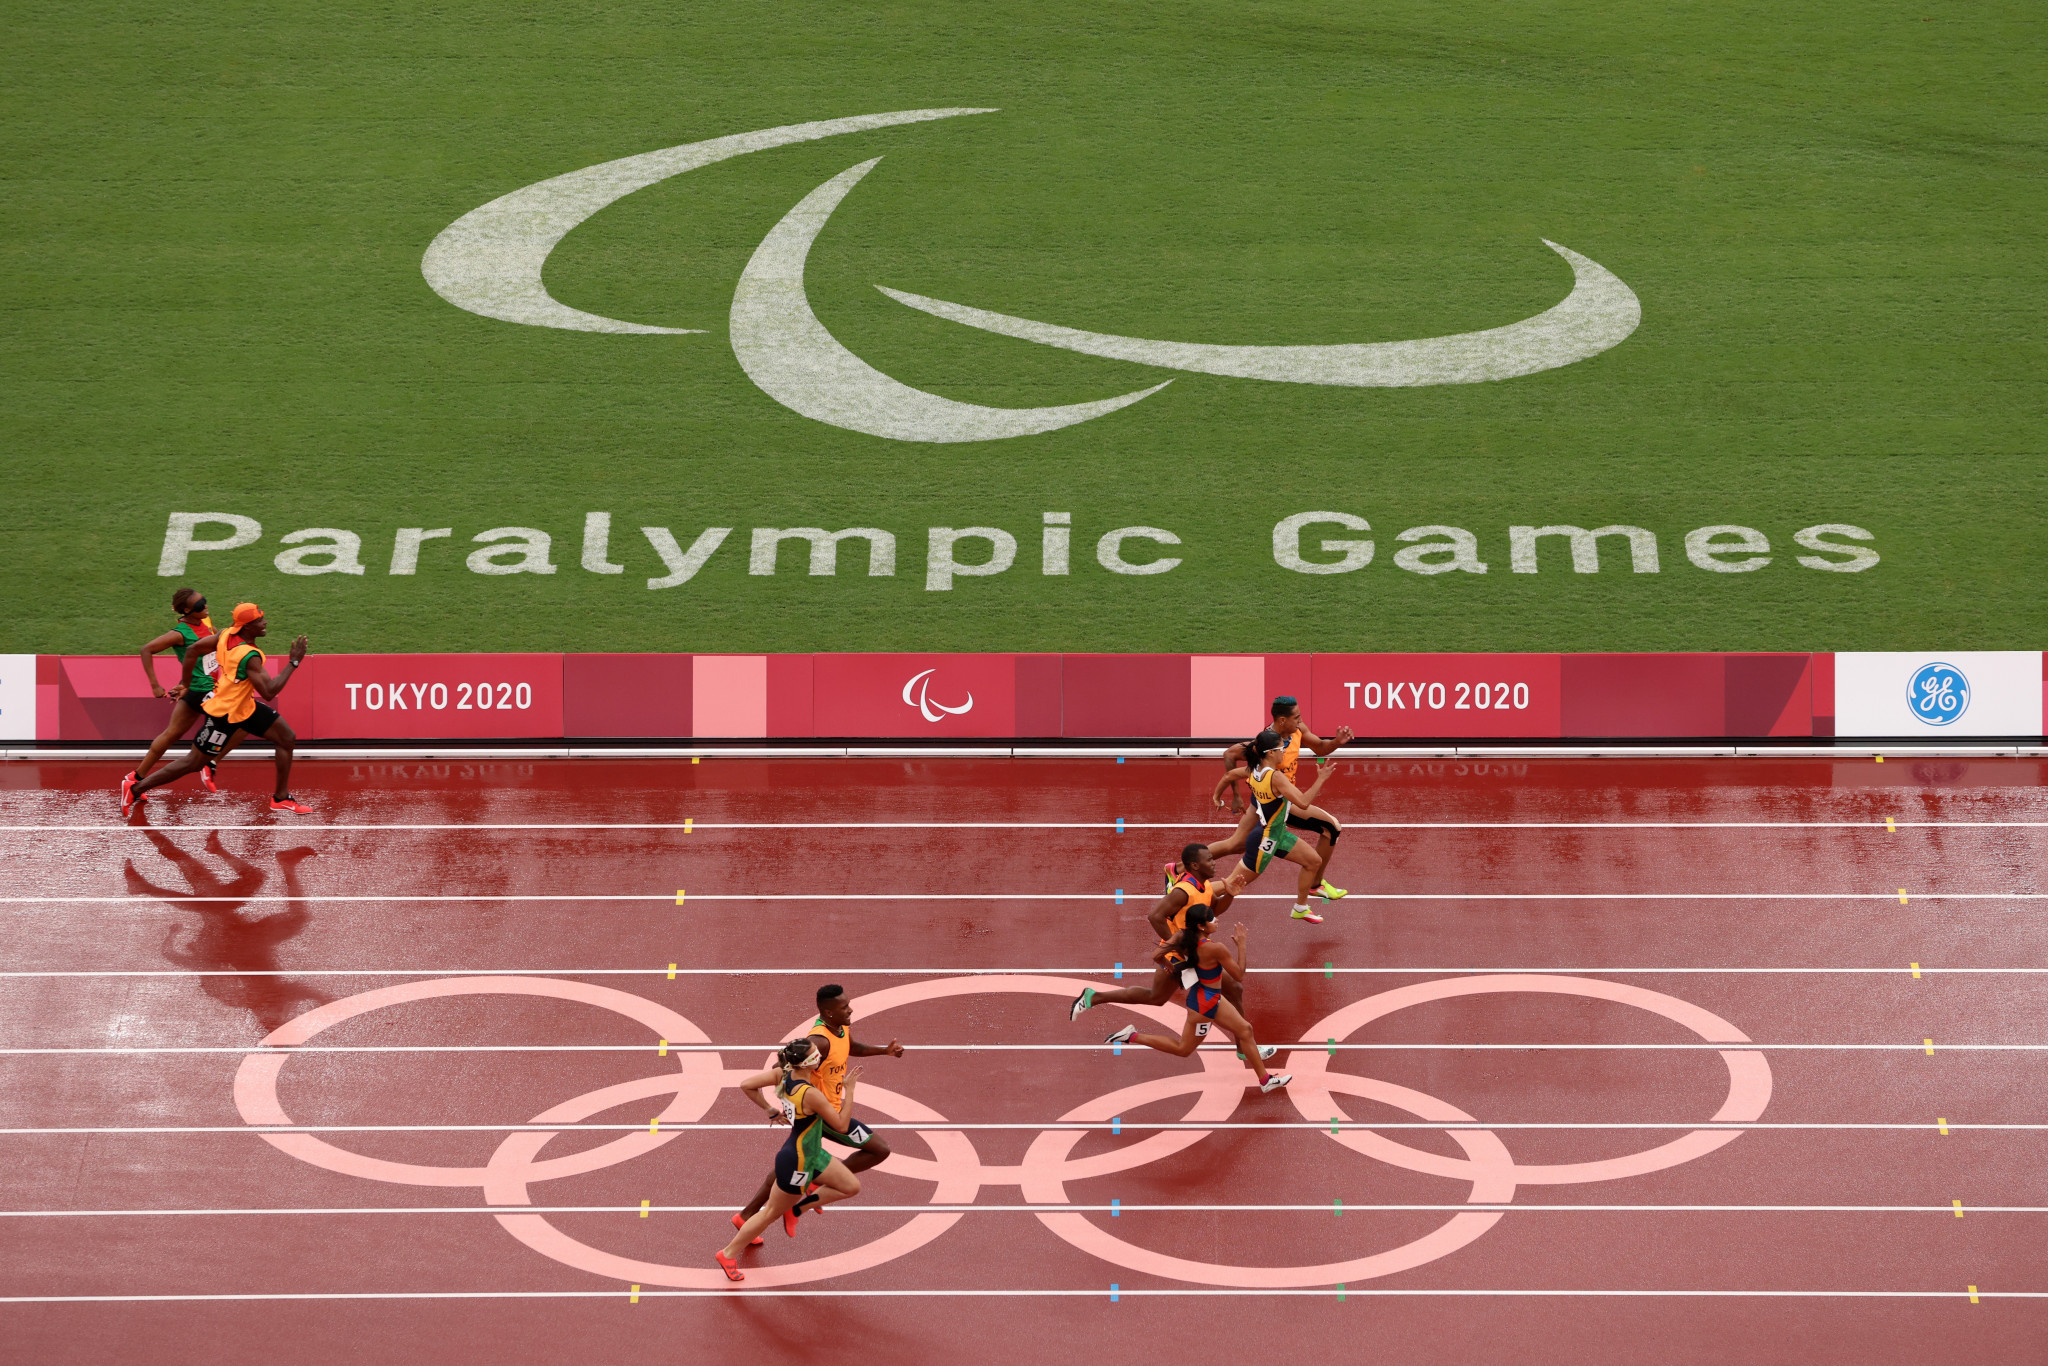 Tokyo has staged the Olympic and Paralympic Games during the coronavirus pandemic ©Getty Images